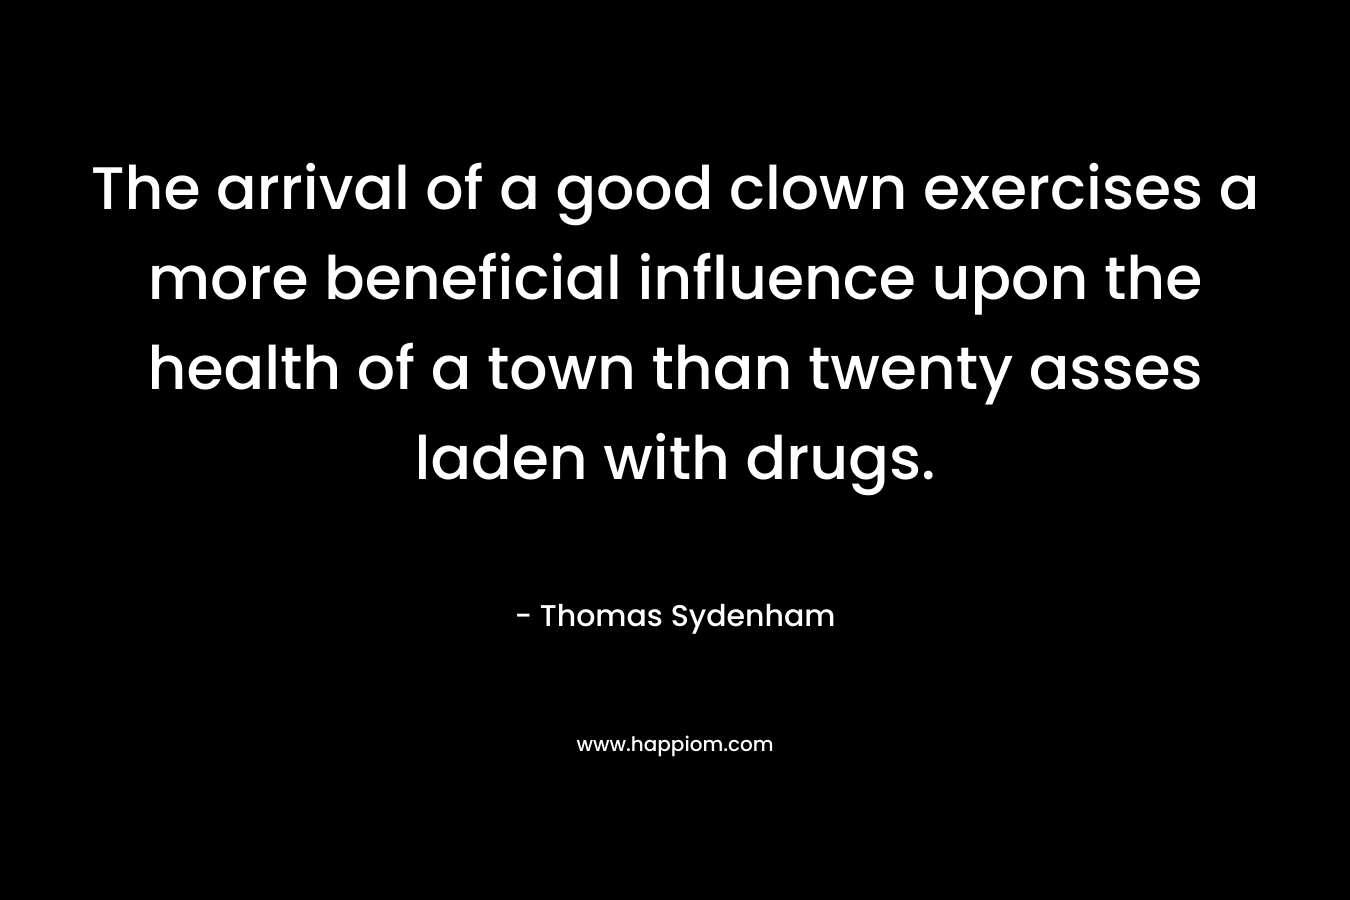 The arrival of a good clown exercises a more beneficial influence upon the health of a town than twenty asses laden with drugs. – Thomas Sydenham